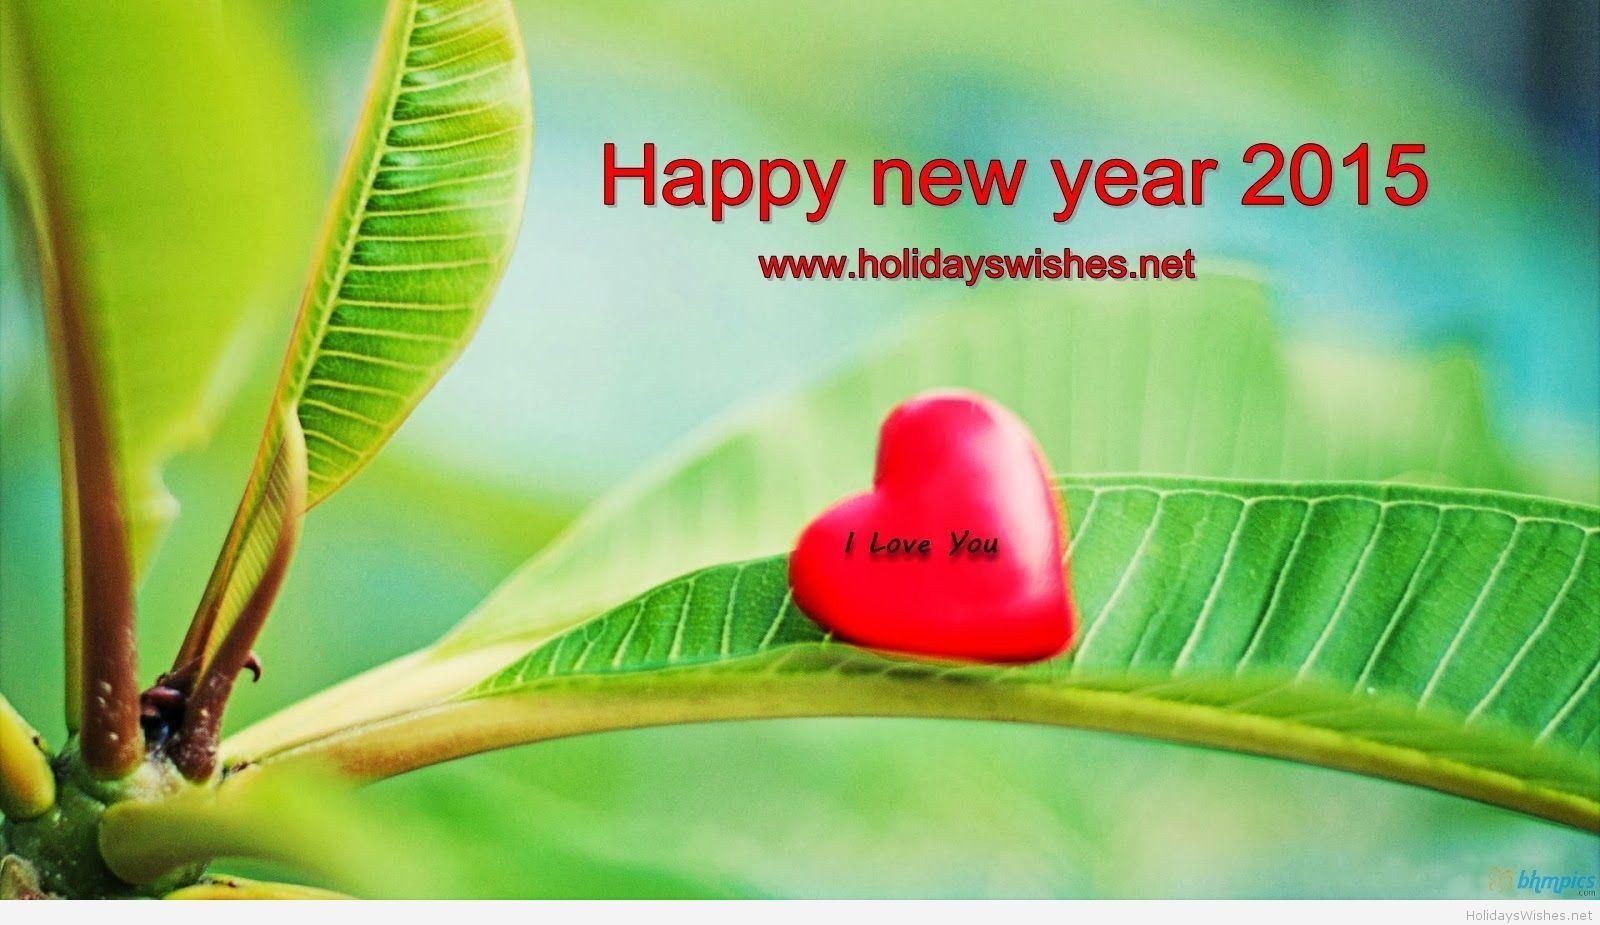 Happy new year and I love you HD wallpaper 2015